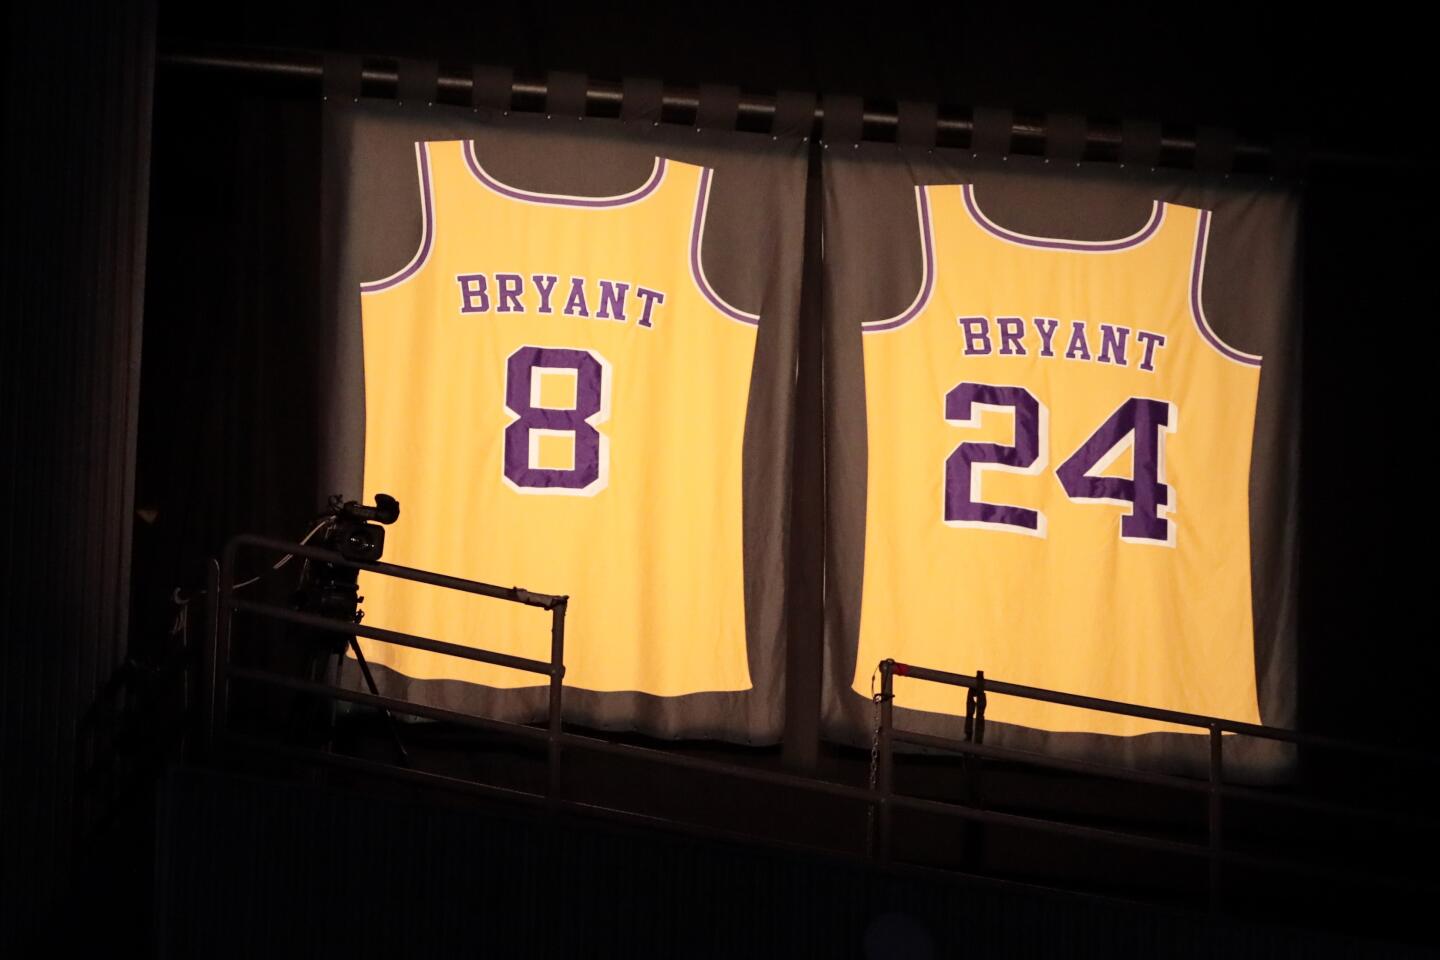 Kobe Bryant's jerseys hang in the rafters at Staples Center